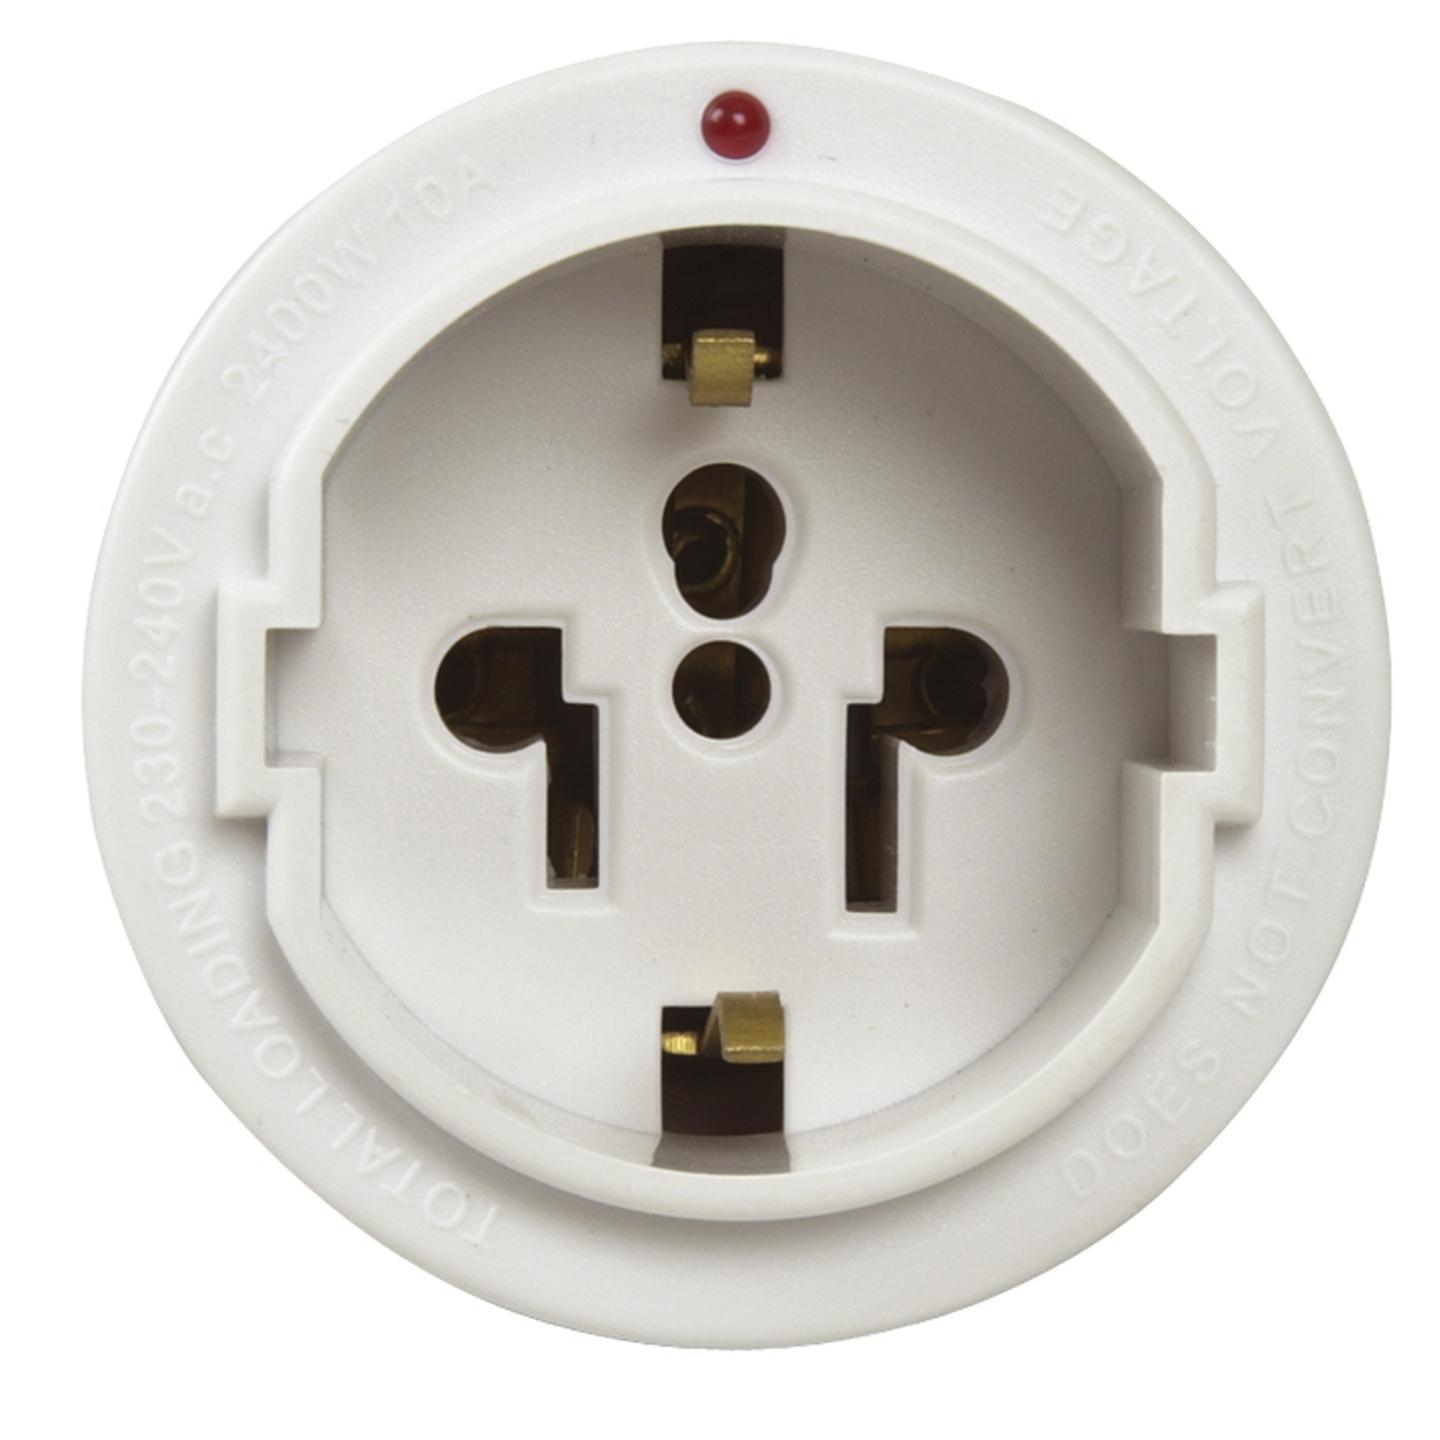 Earthed Adaptor for Australia & NZ with Surge Protection